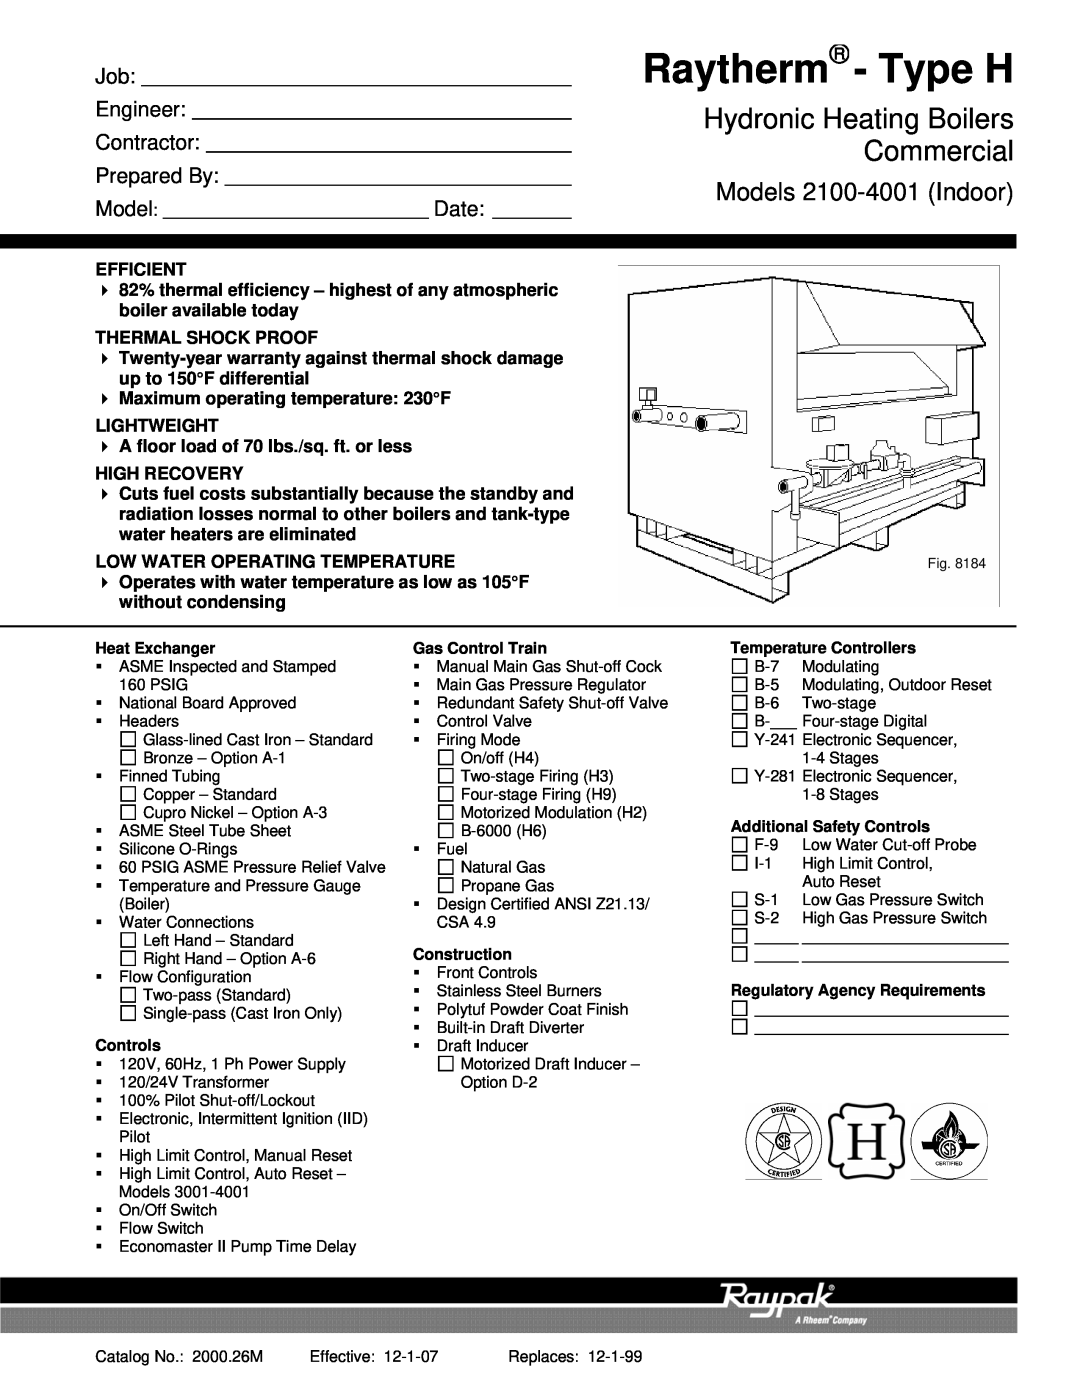 Raypak 2100-4001 warranty Hydronic Heating Boilers, Commercial, Engineer, Contractor, Prepared By, Model, Date 